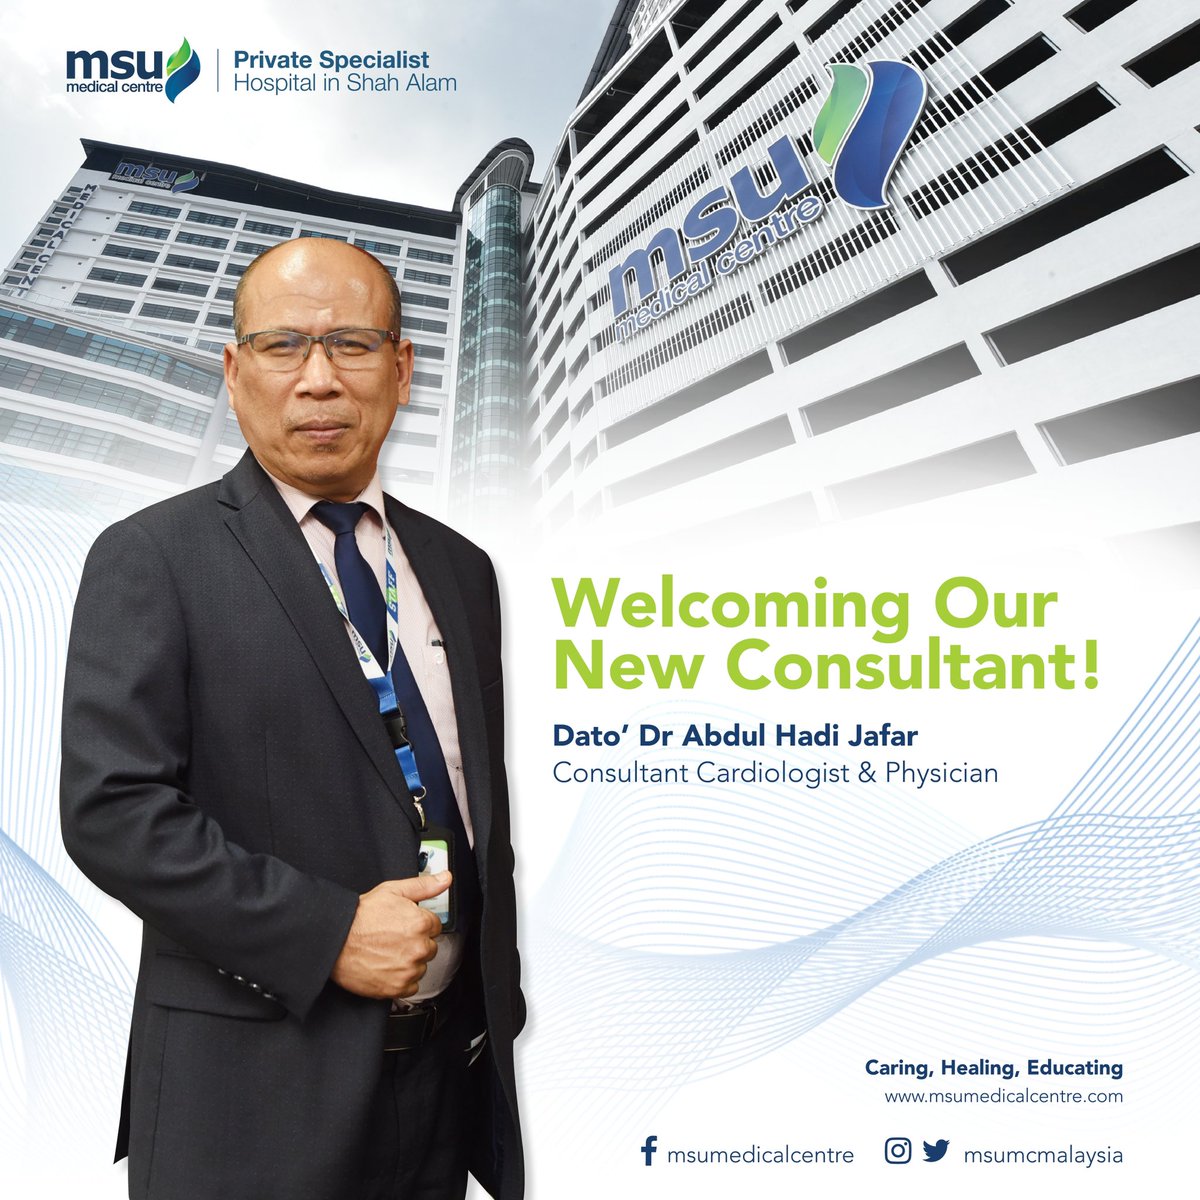 Warm greetings to Dato’ Dr Abdul Hadi Jafar, our new Consultant Cardiologist & Physician at MSU Medical Centre. We are thrilled to have you join us, and together we will work to improve our services and achievements in accordance with our tagline, #CaringHealingEducating